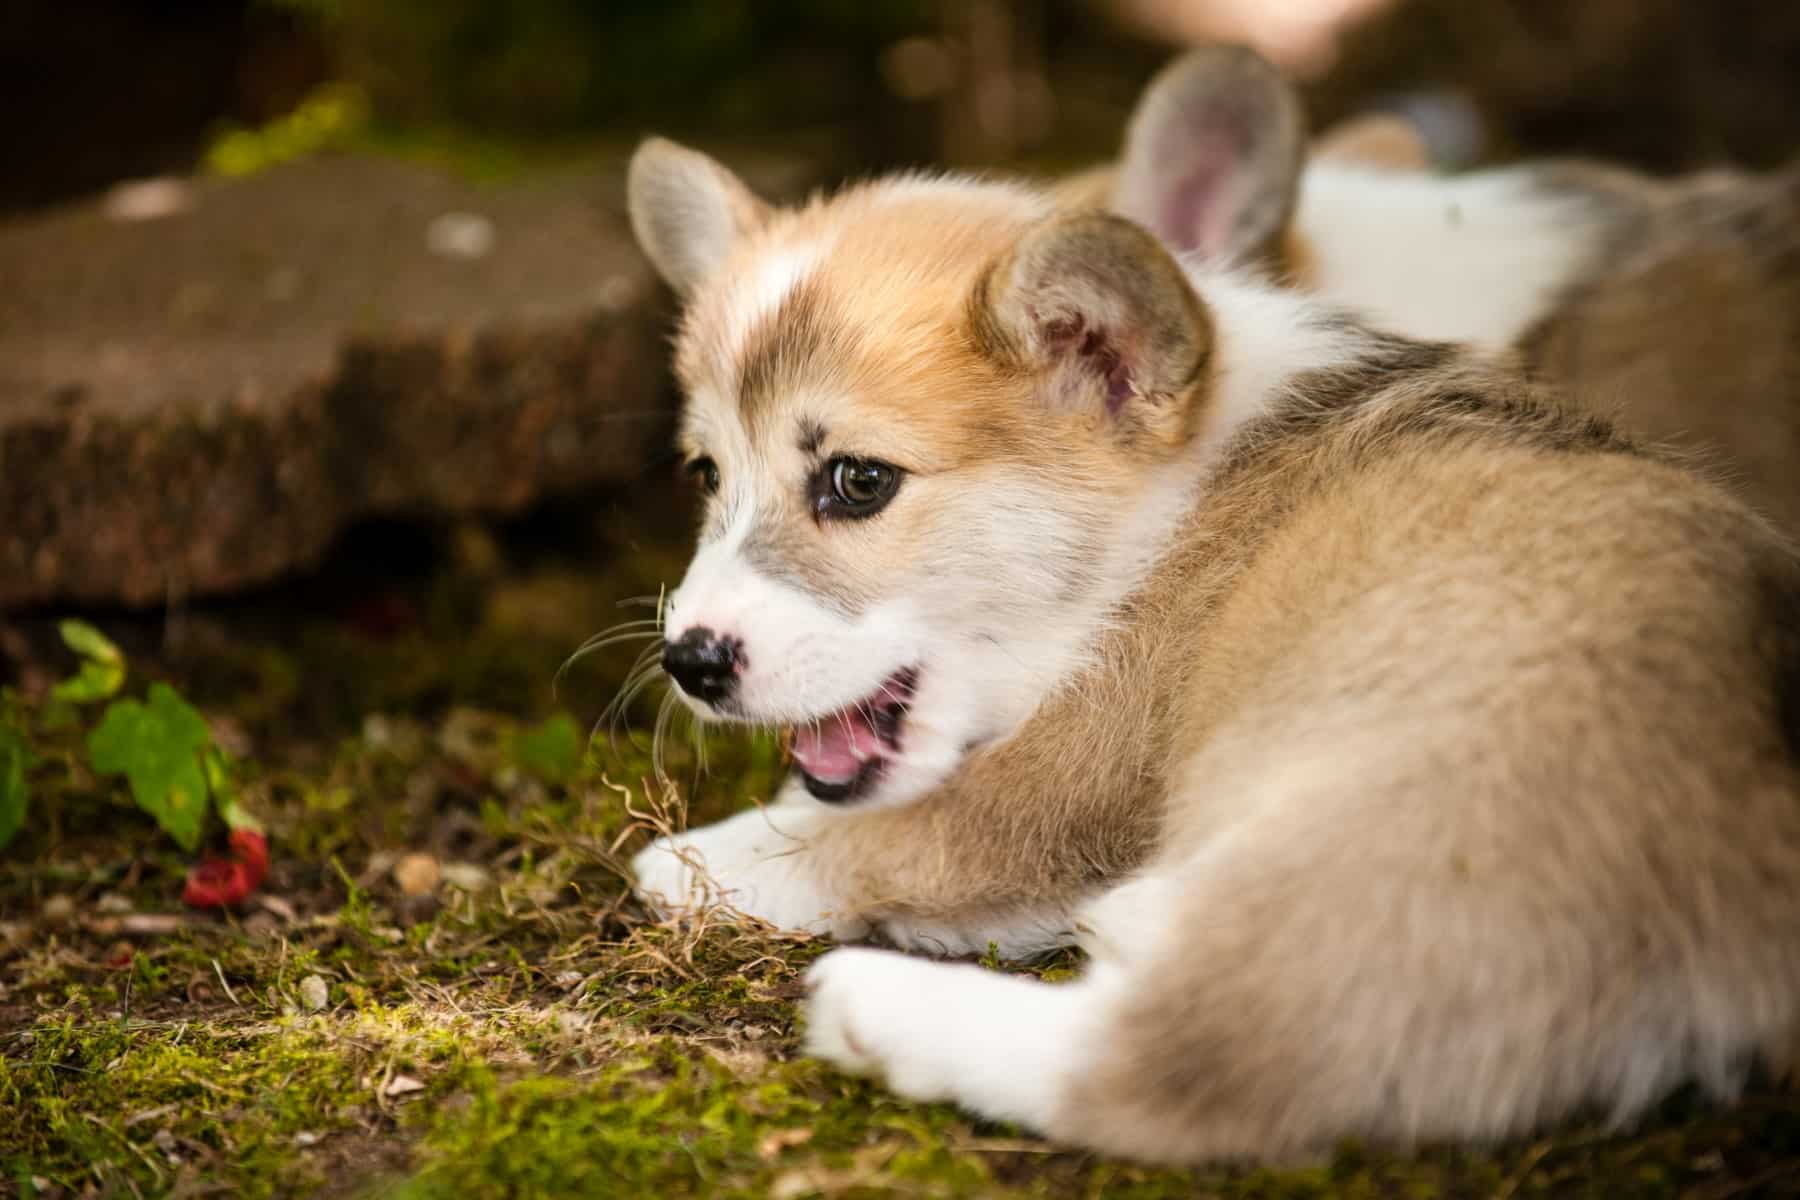 Are Corgis High Maintenance Dogs? This corgi is being naughty, hiding in the garden away from his owner.